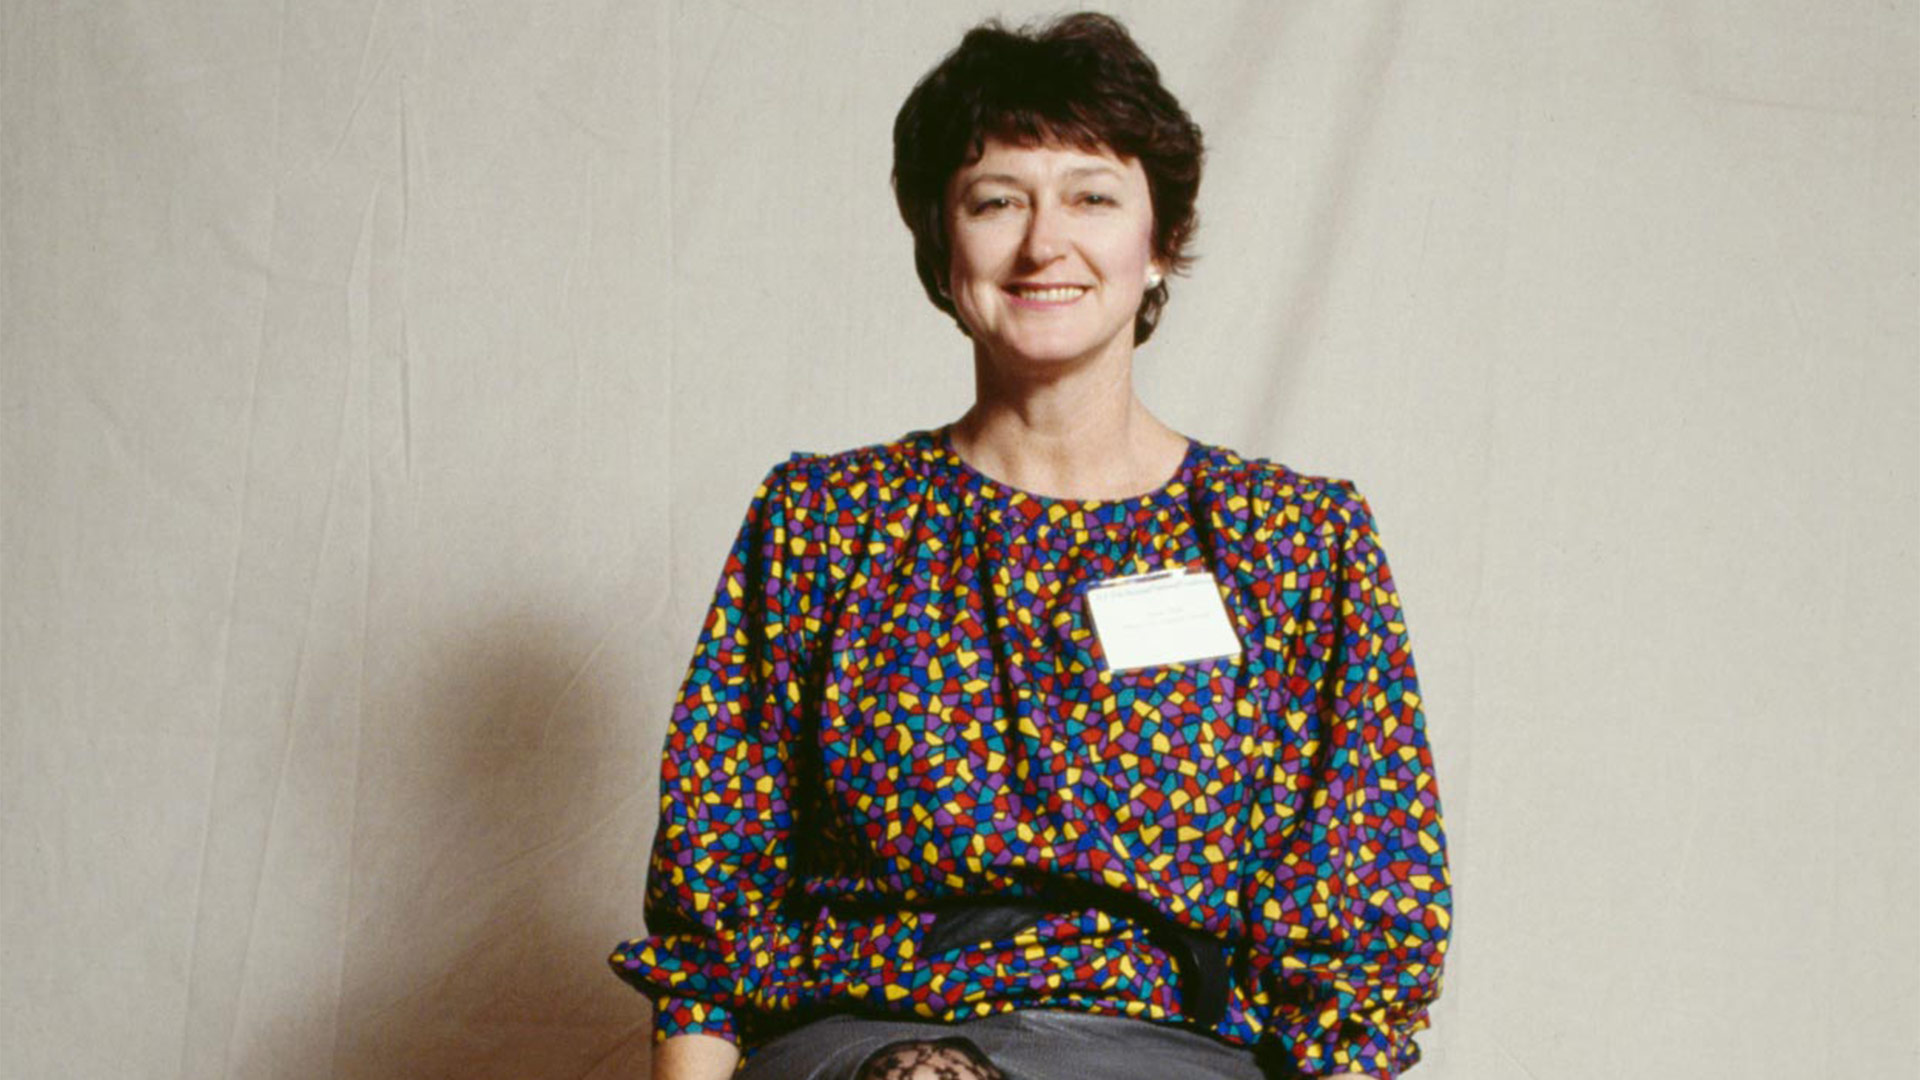 Older image of Susan Ryan, she has short brown hair with a loose multicoloured spotted top. 